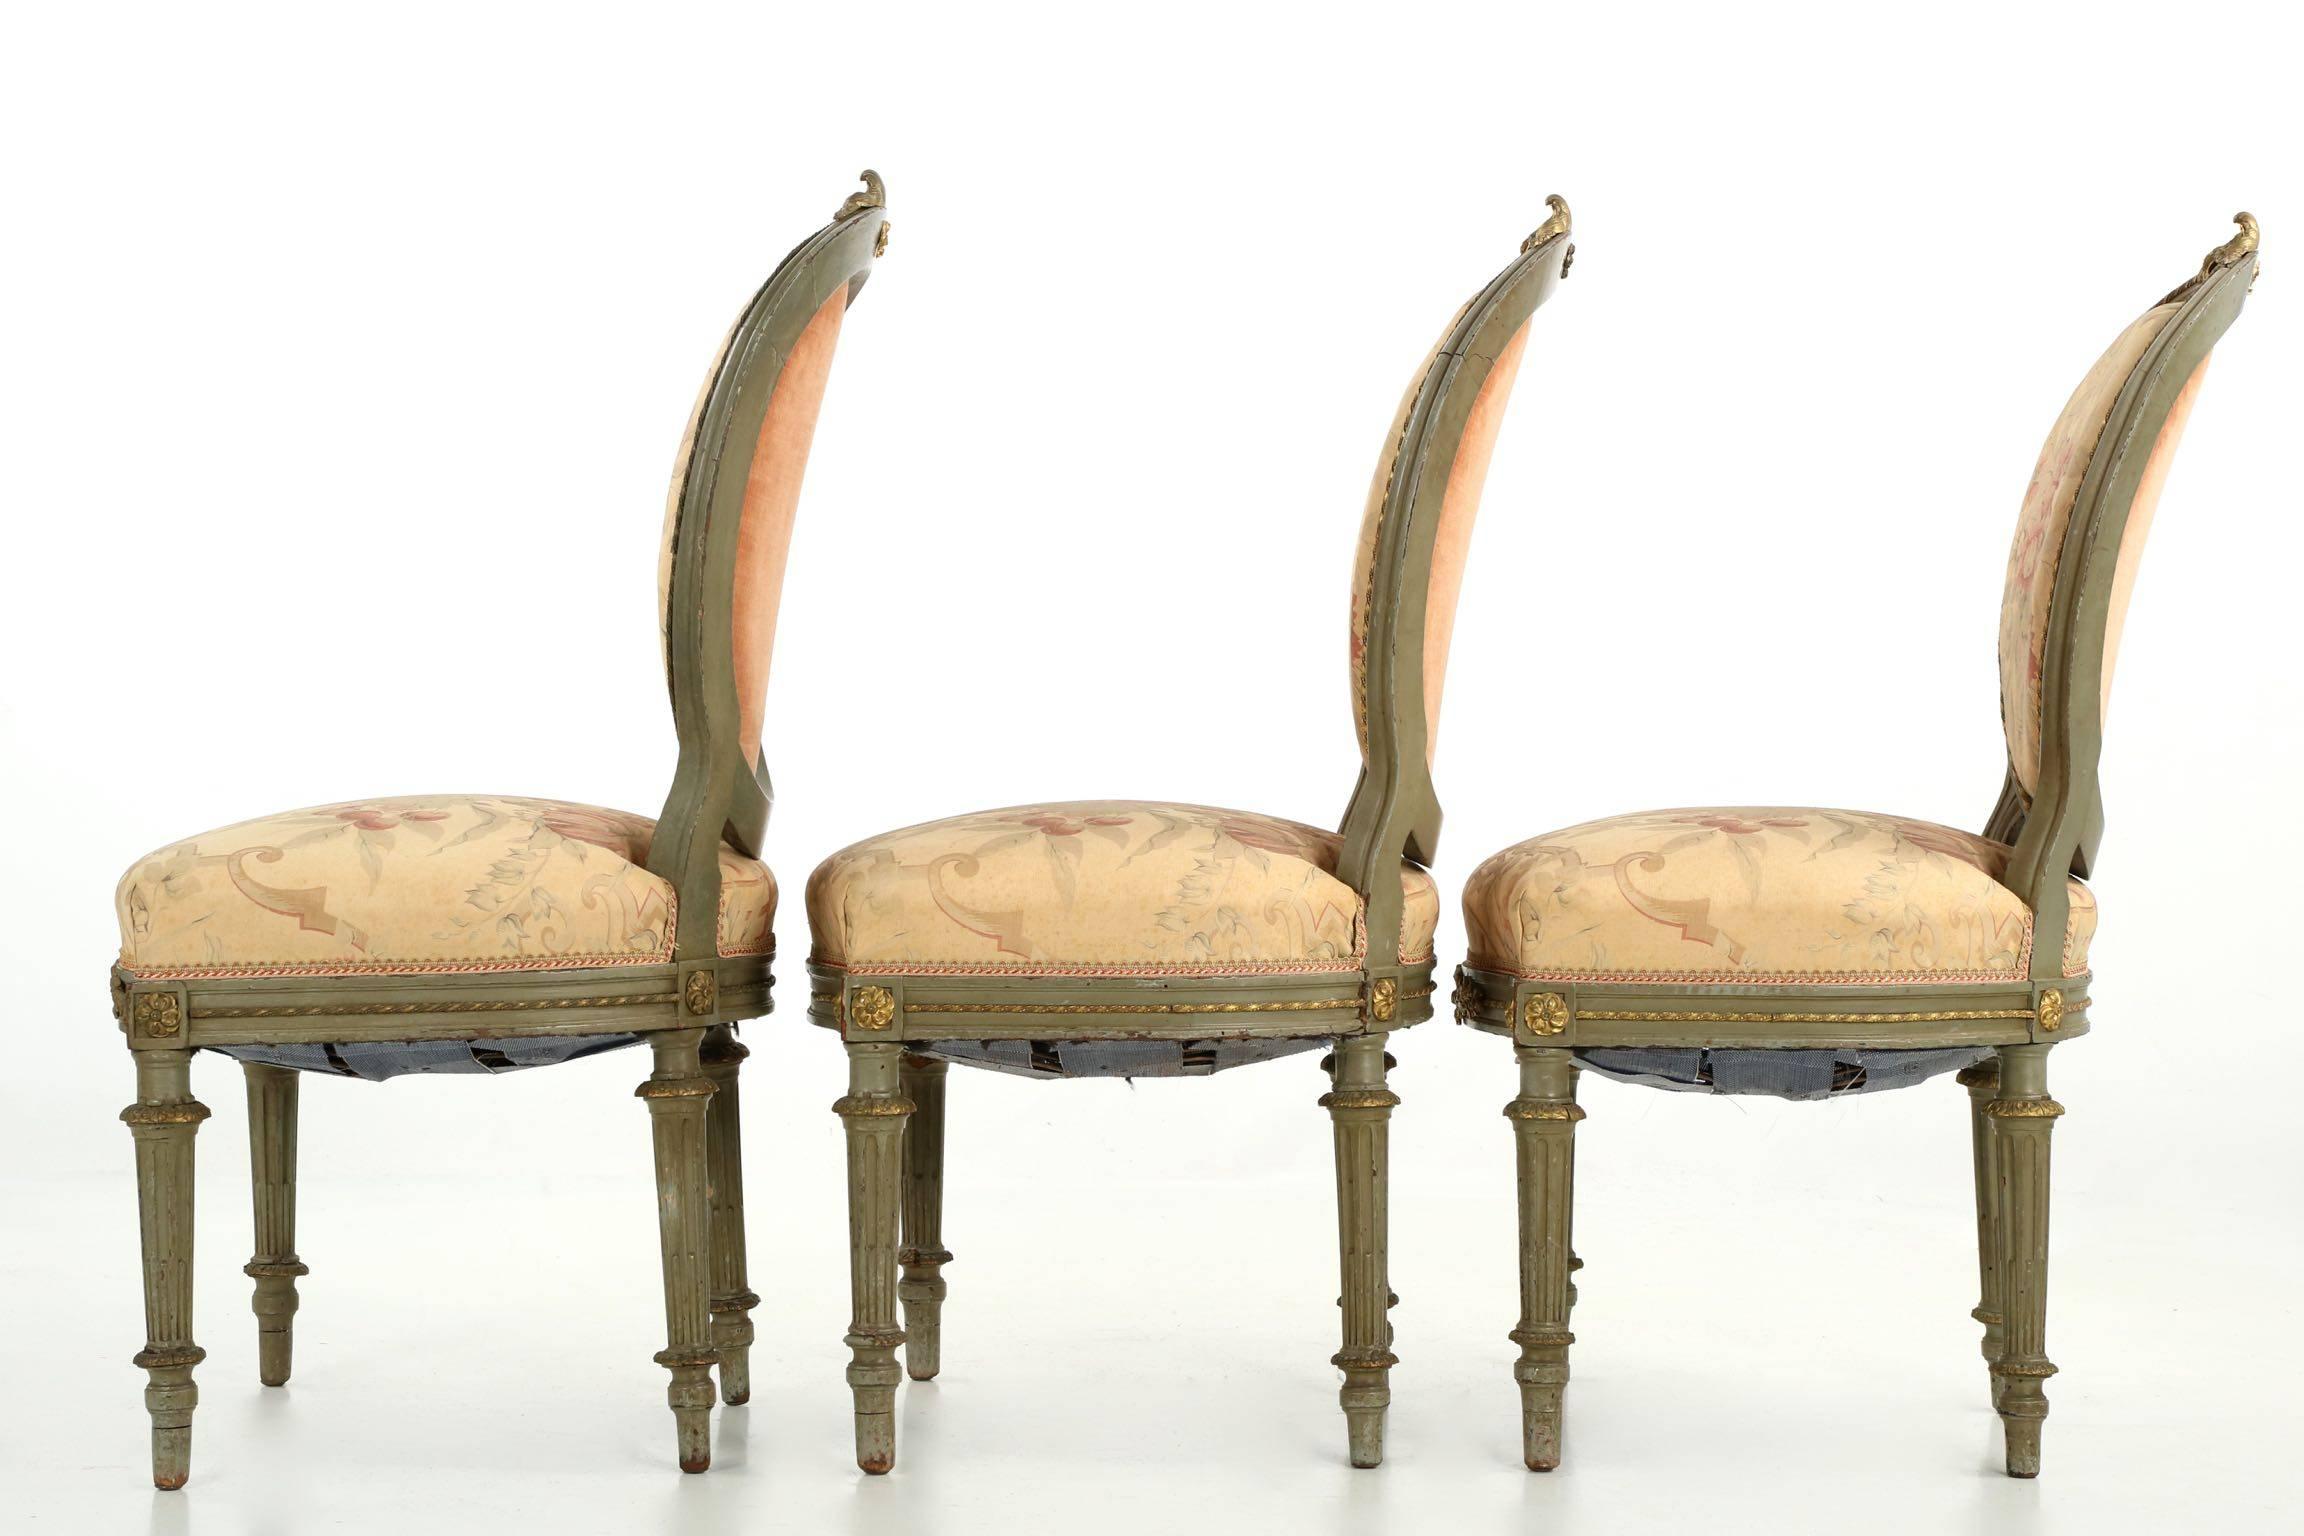 Gilt Set of Five French Louis XVI Style Antique Side and Armchairs, 19th Century